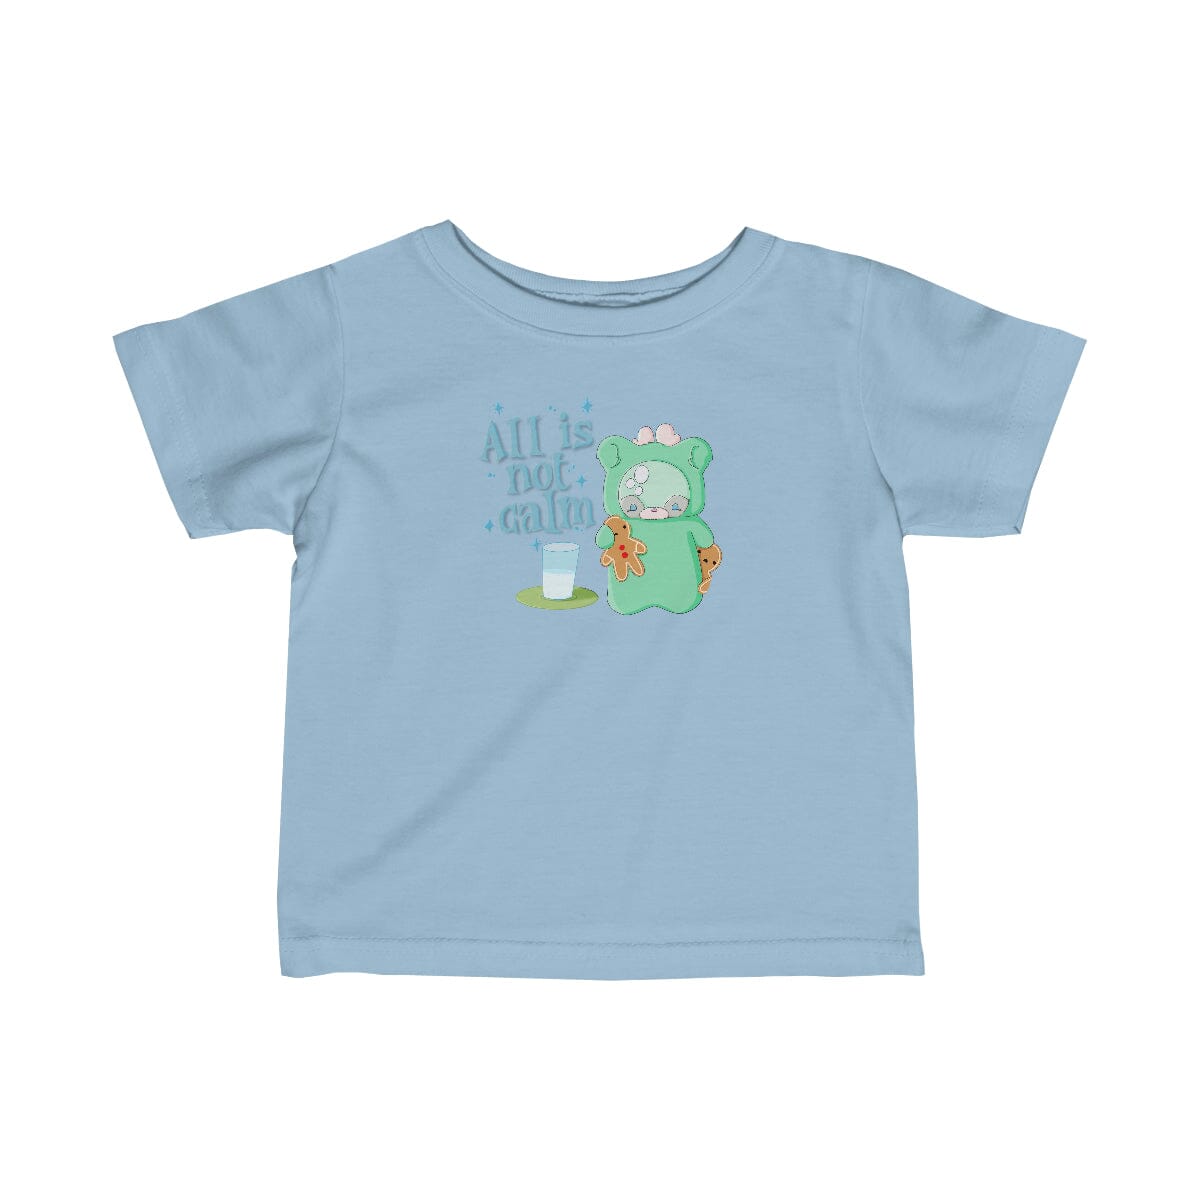 The Griswold Infant Tee